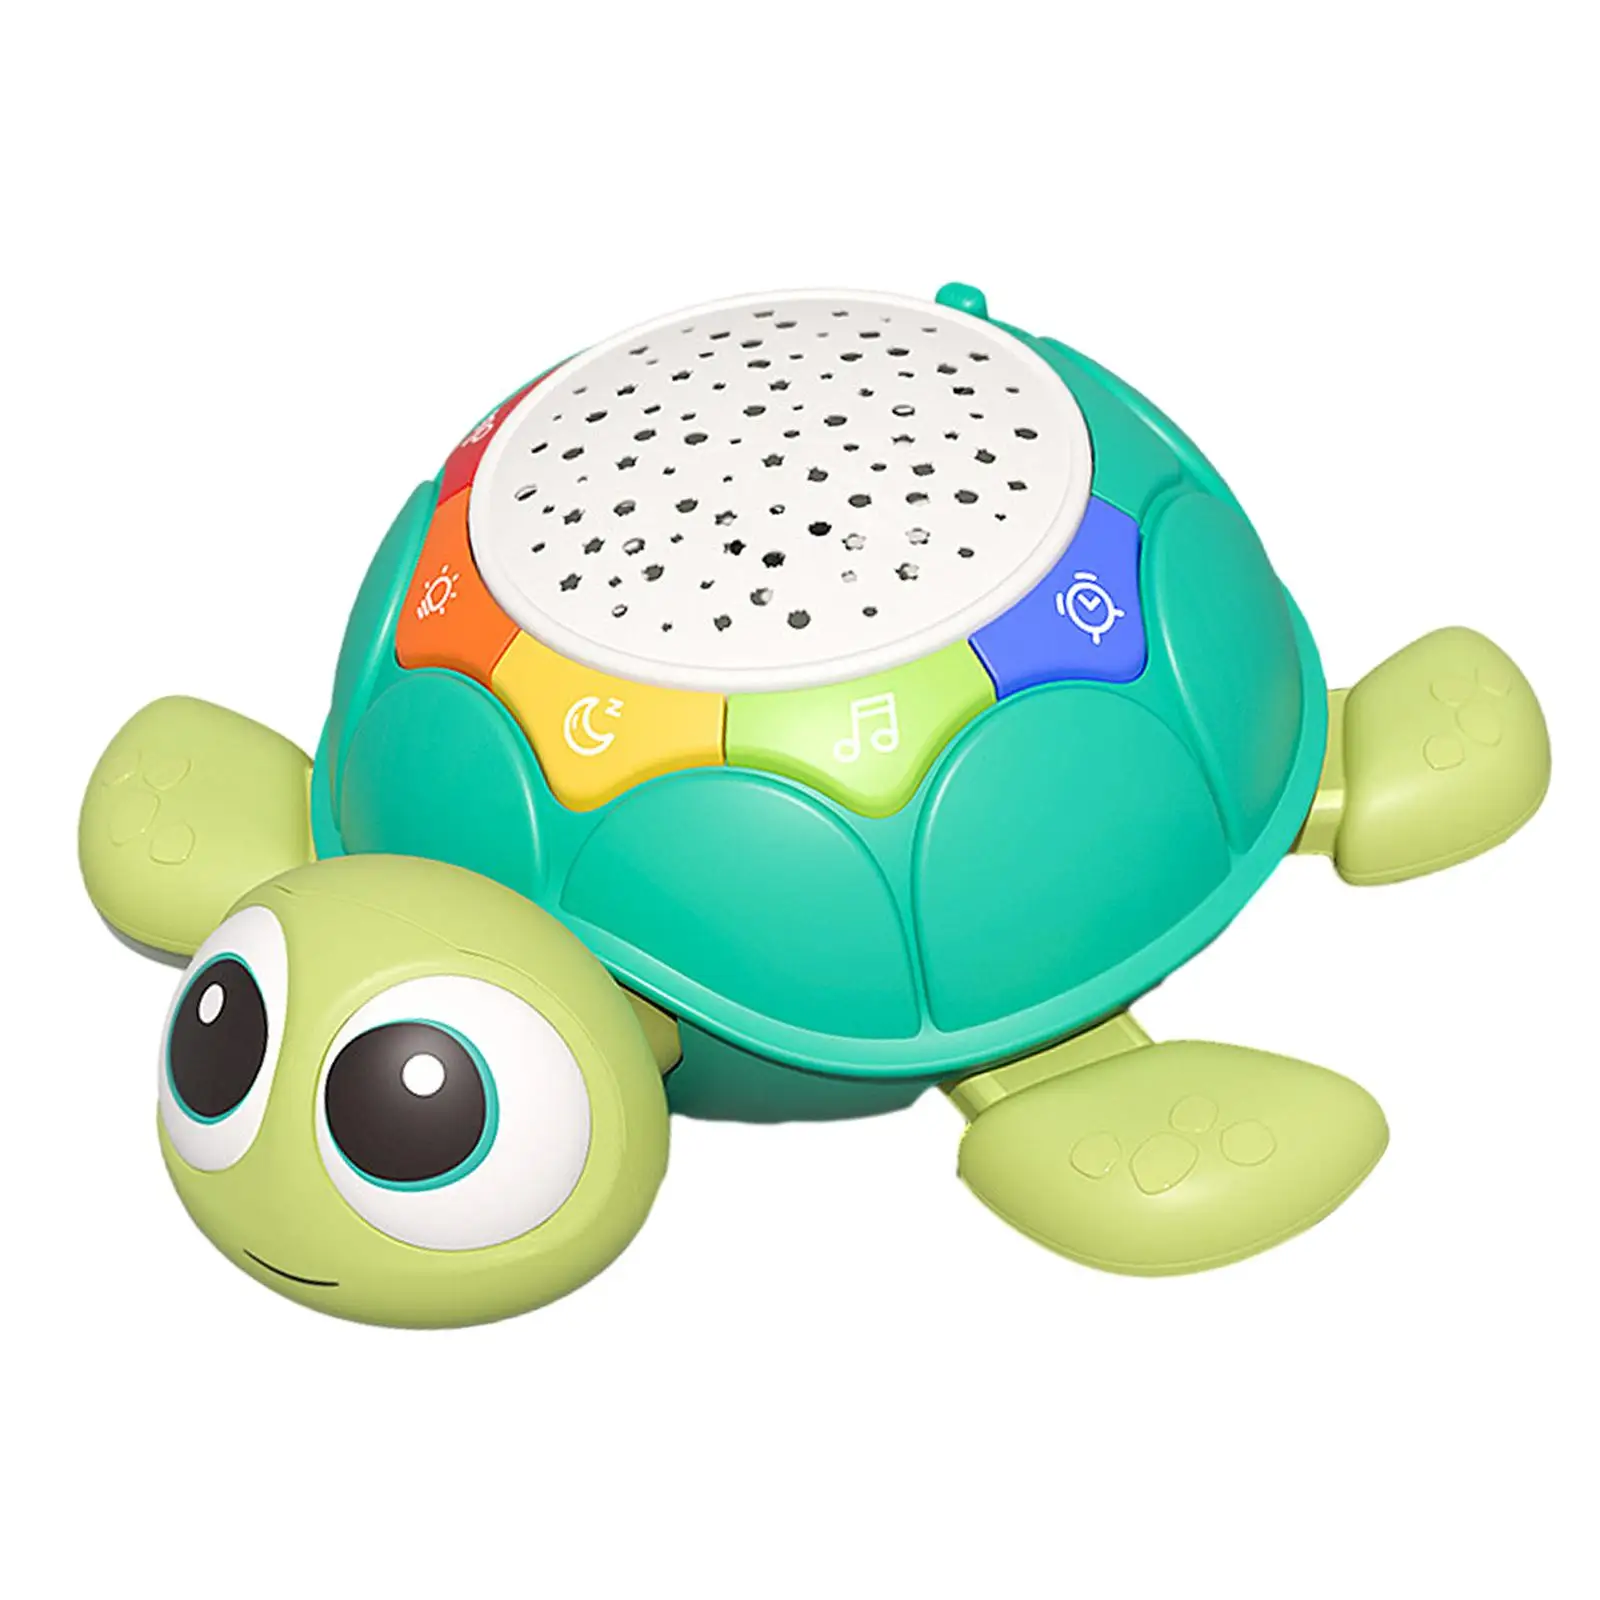 Turtle Musical Crawling Baby Toys with Music and Light Stocking Stuffers Educational Toy Starlight Interactive for 7 8 9 Month